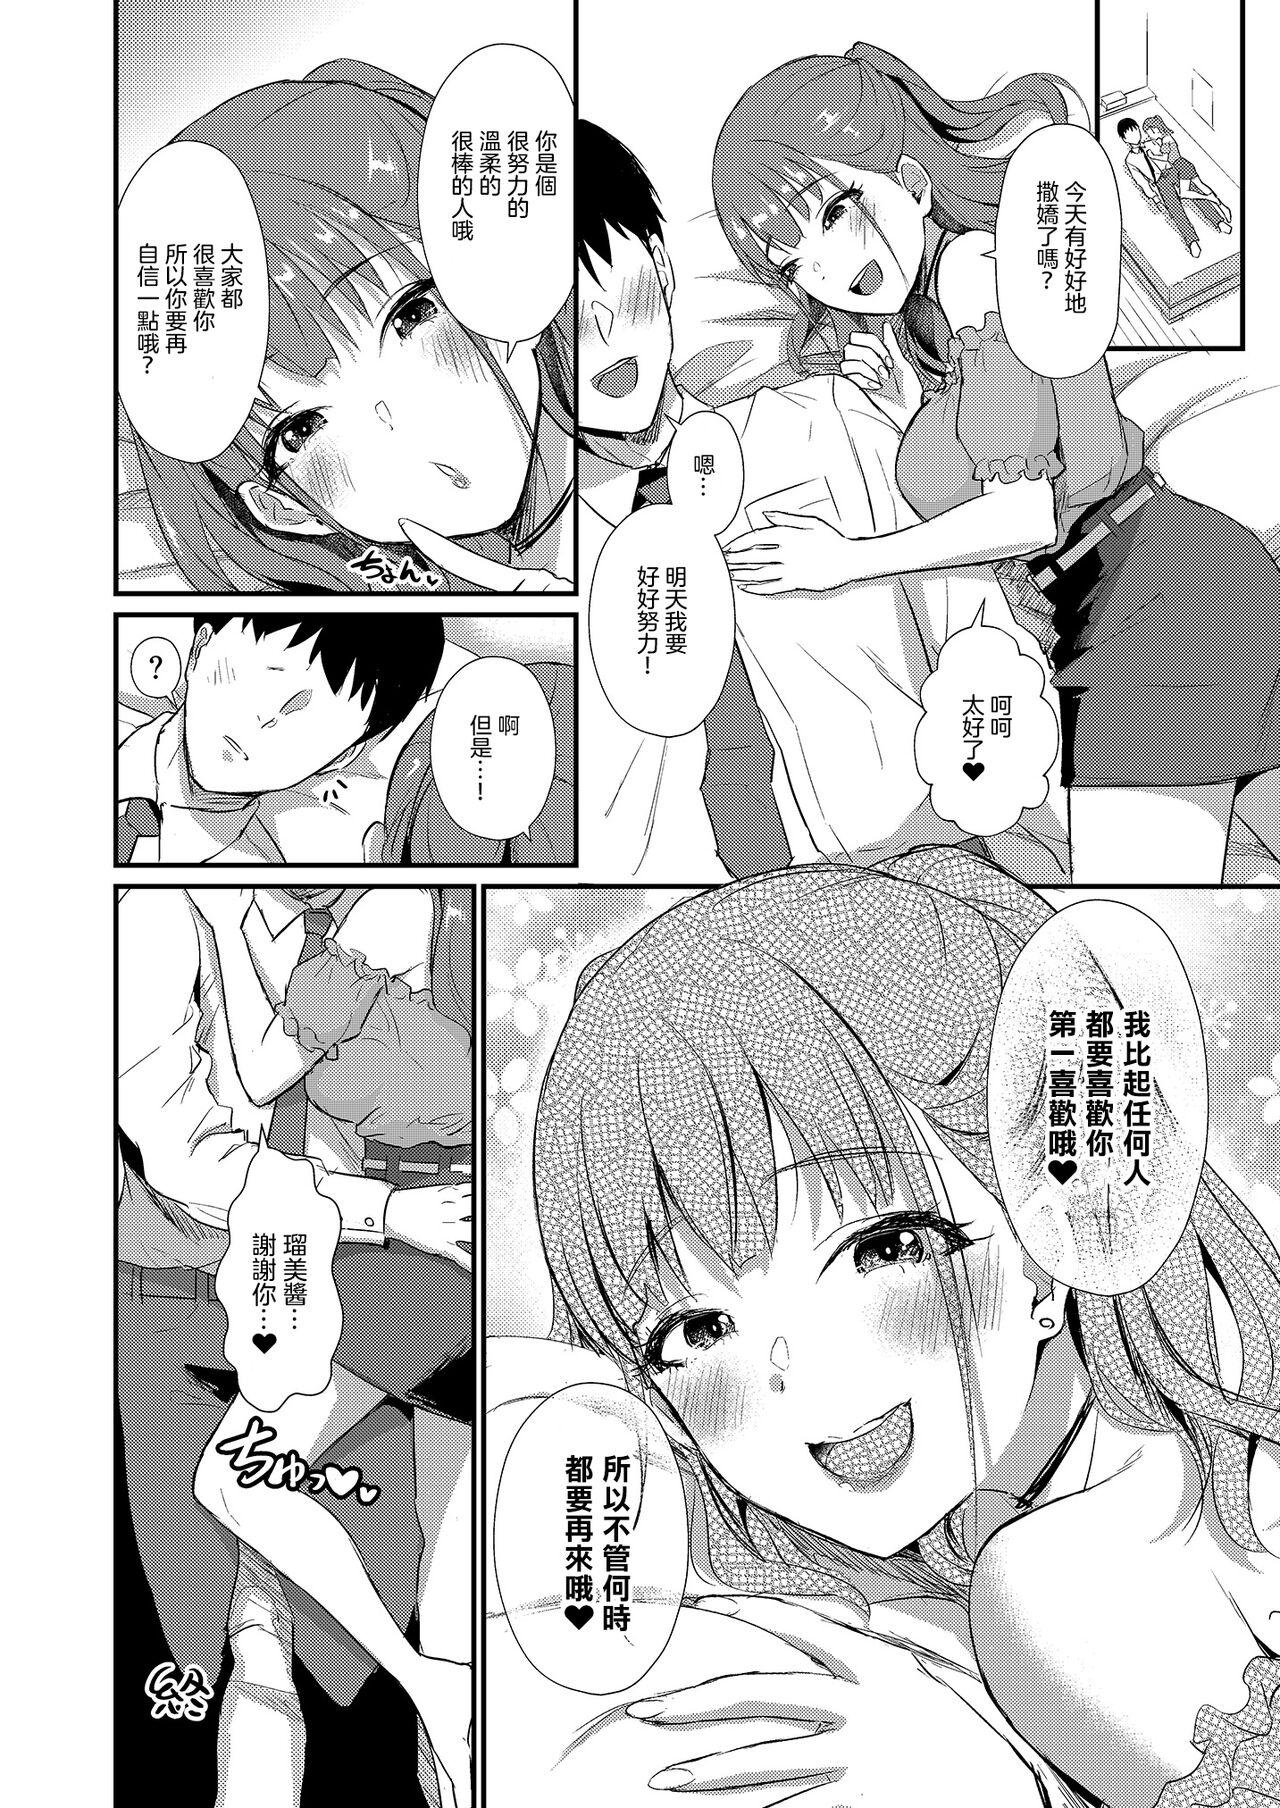 Girl Girl Homehome Home e Youkoso! - Welcome to Home Home Home! | 歡迎來到誇誇屋！ Gay Physicals - Page 15